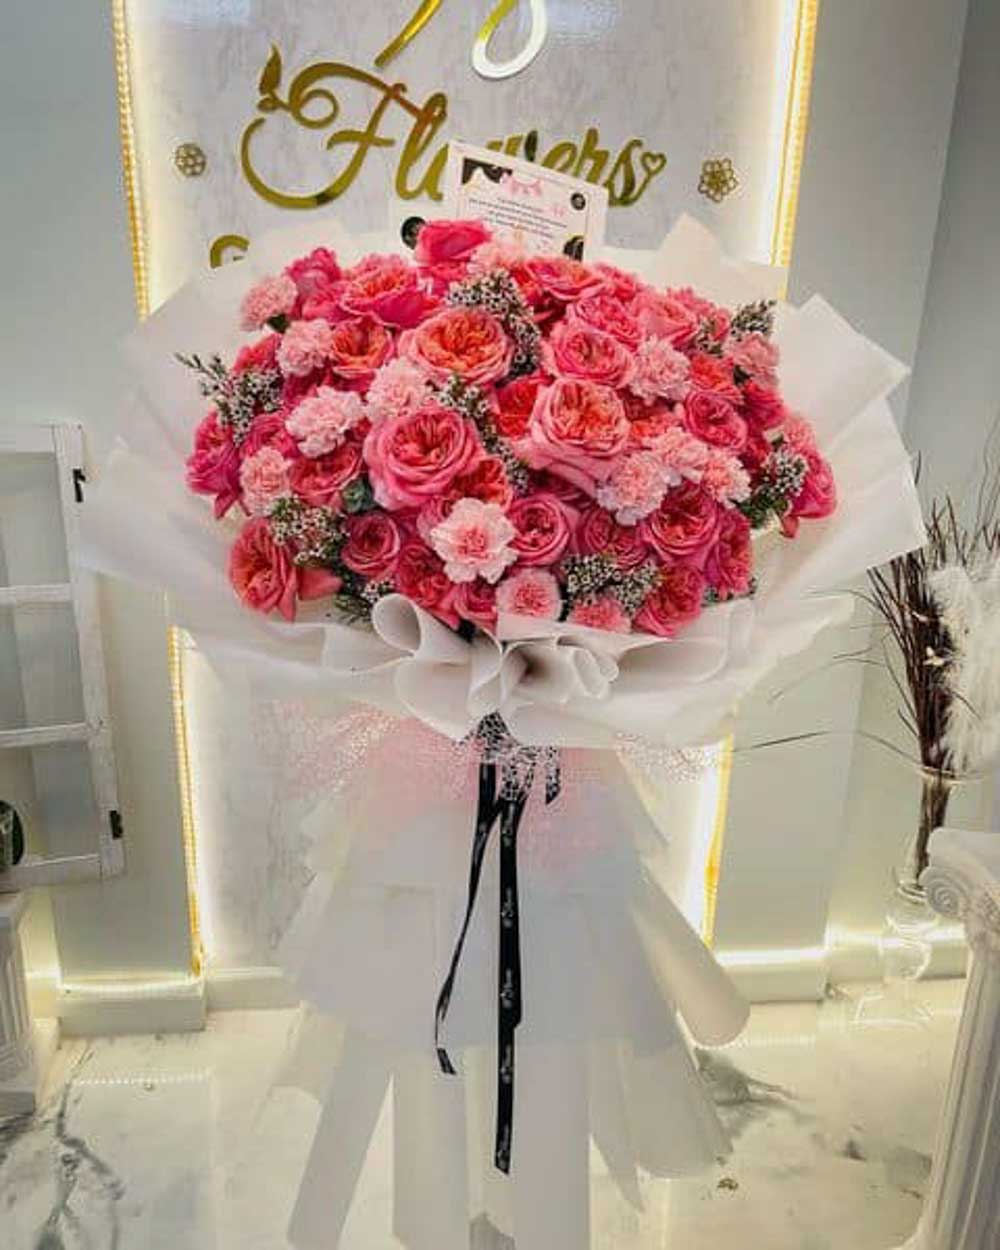 Bouquet Of Hot Pink Roses is suitable for wedding anniversary flowers